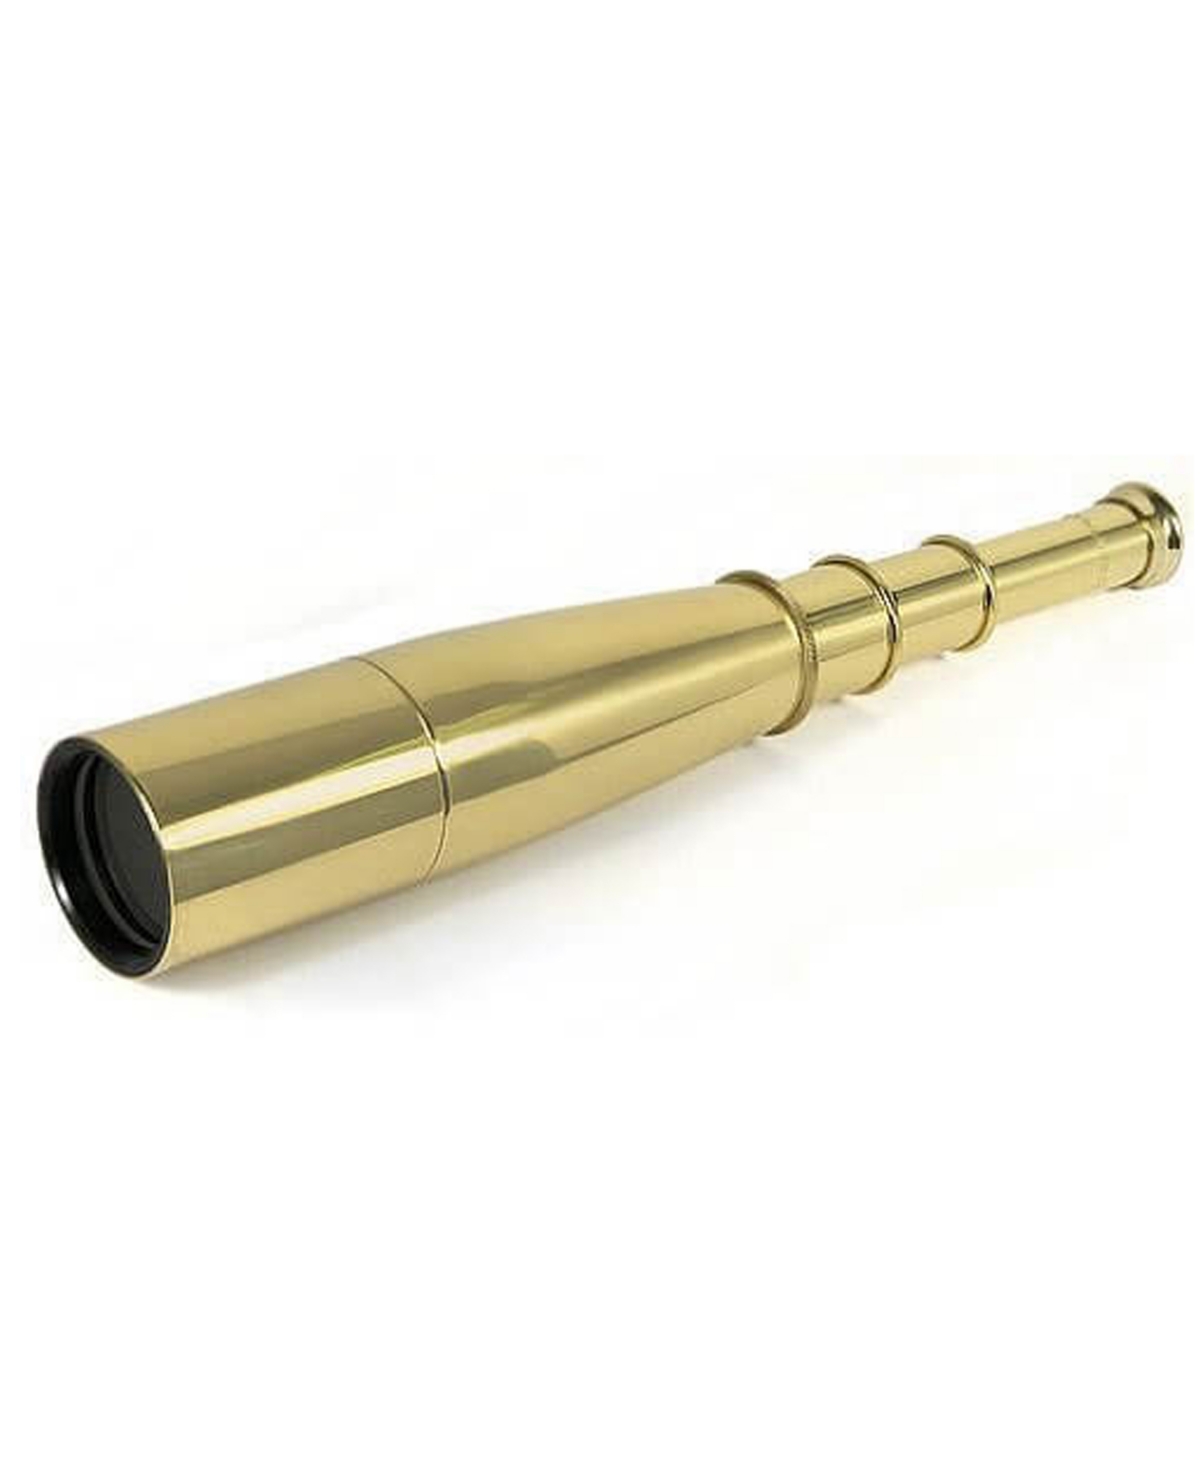 Shop Barska 18x50mm Collapsible Anchormaster Classic Brass Spyscope, Anchormaster With Storage Chest